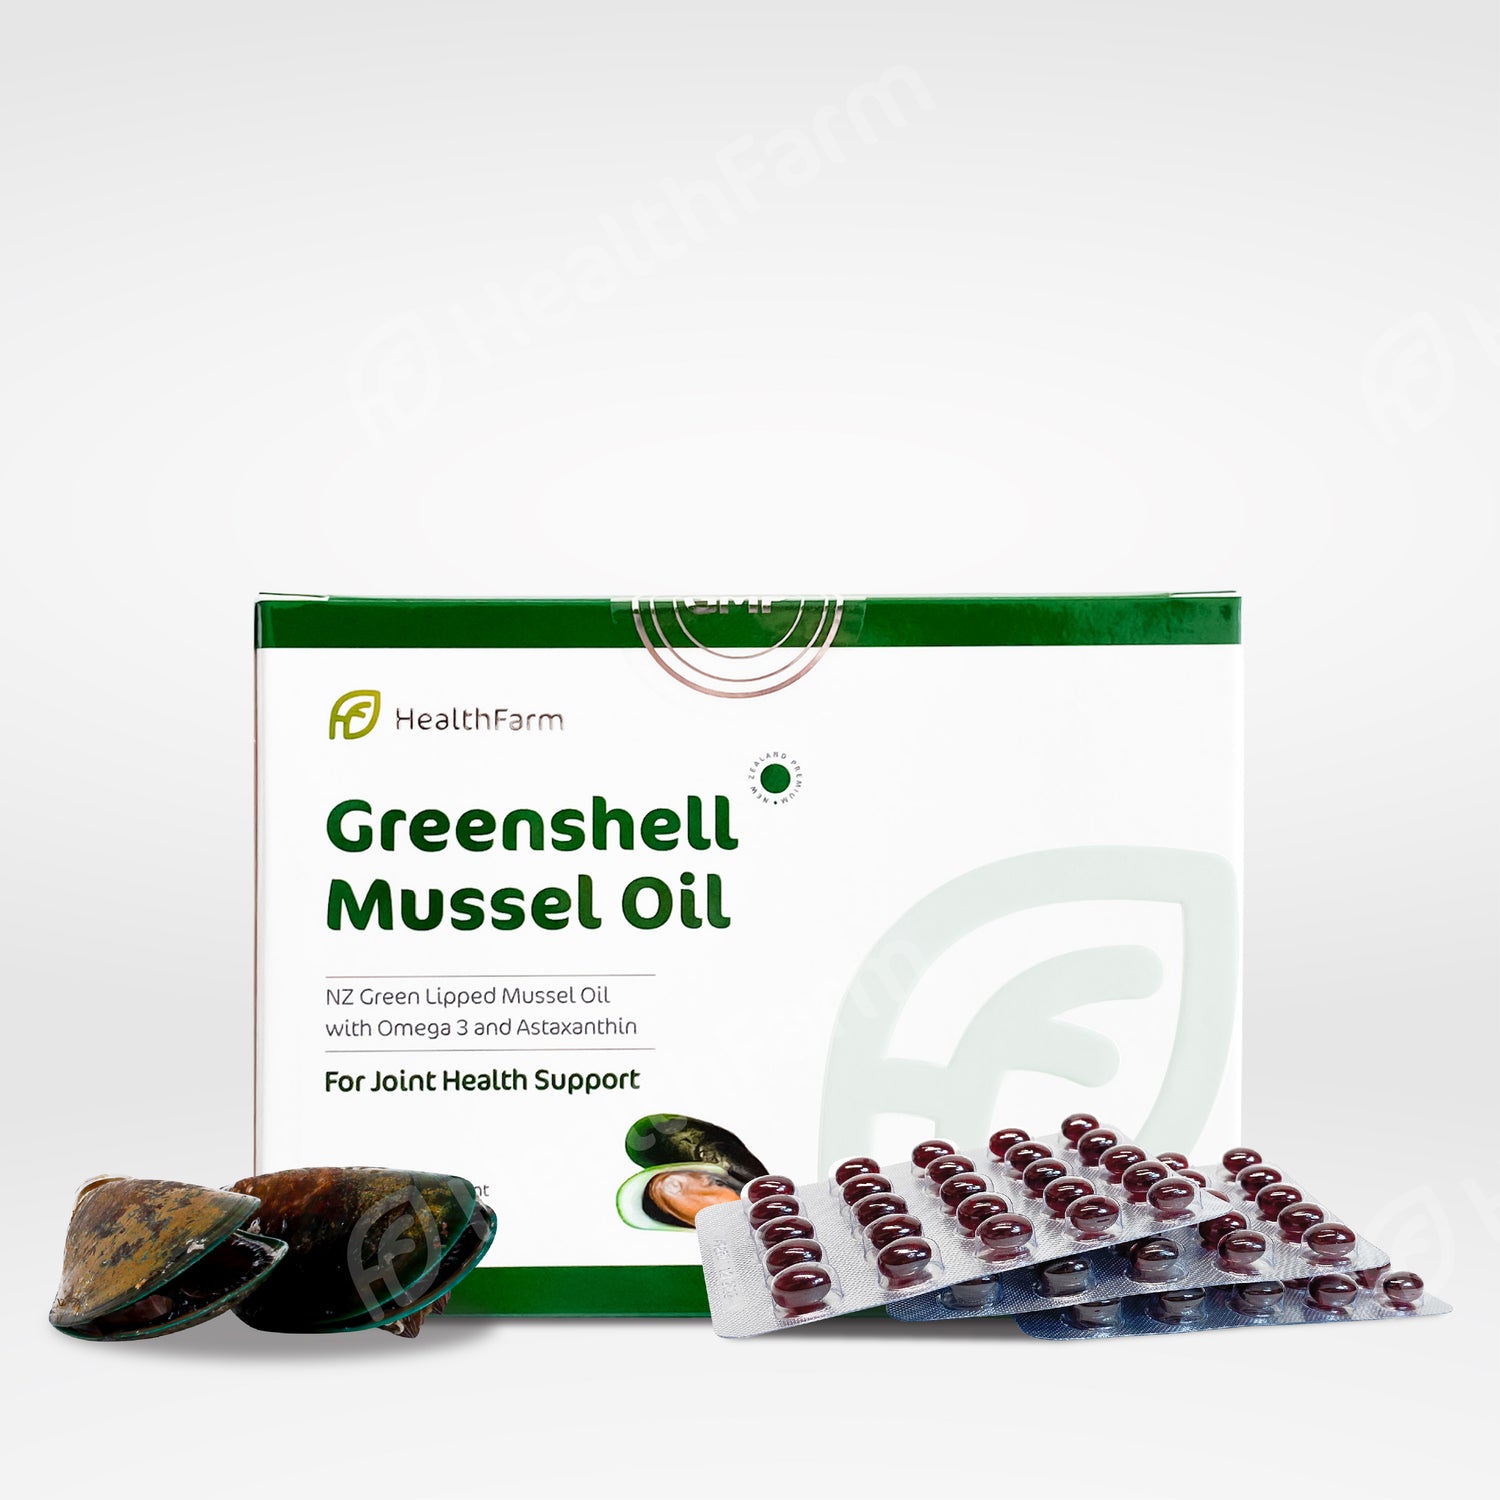 GREEN-LIPPED MUSSEL OIL